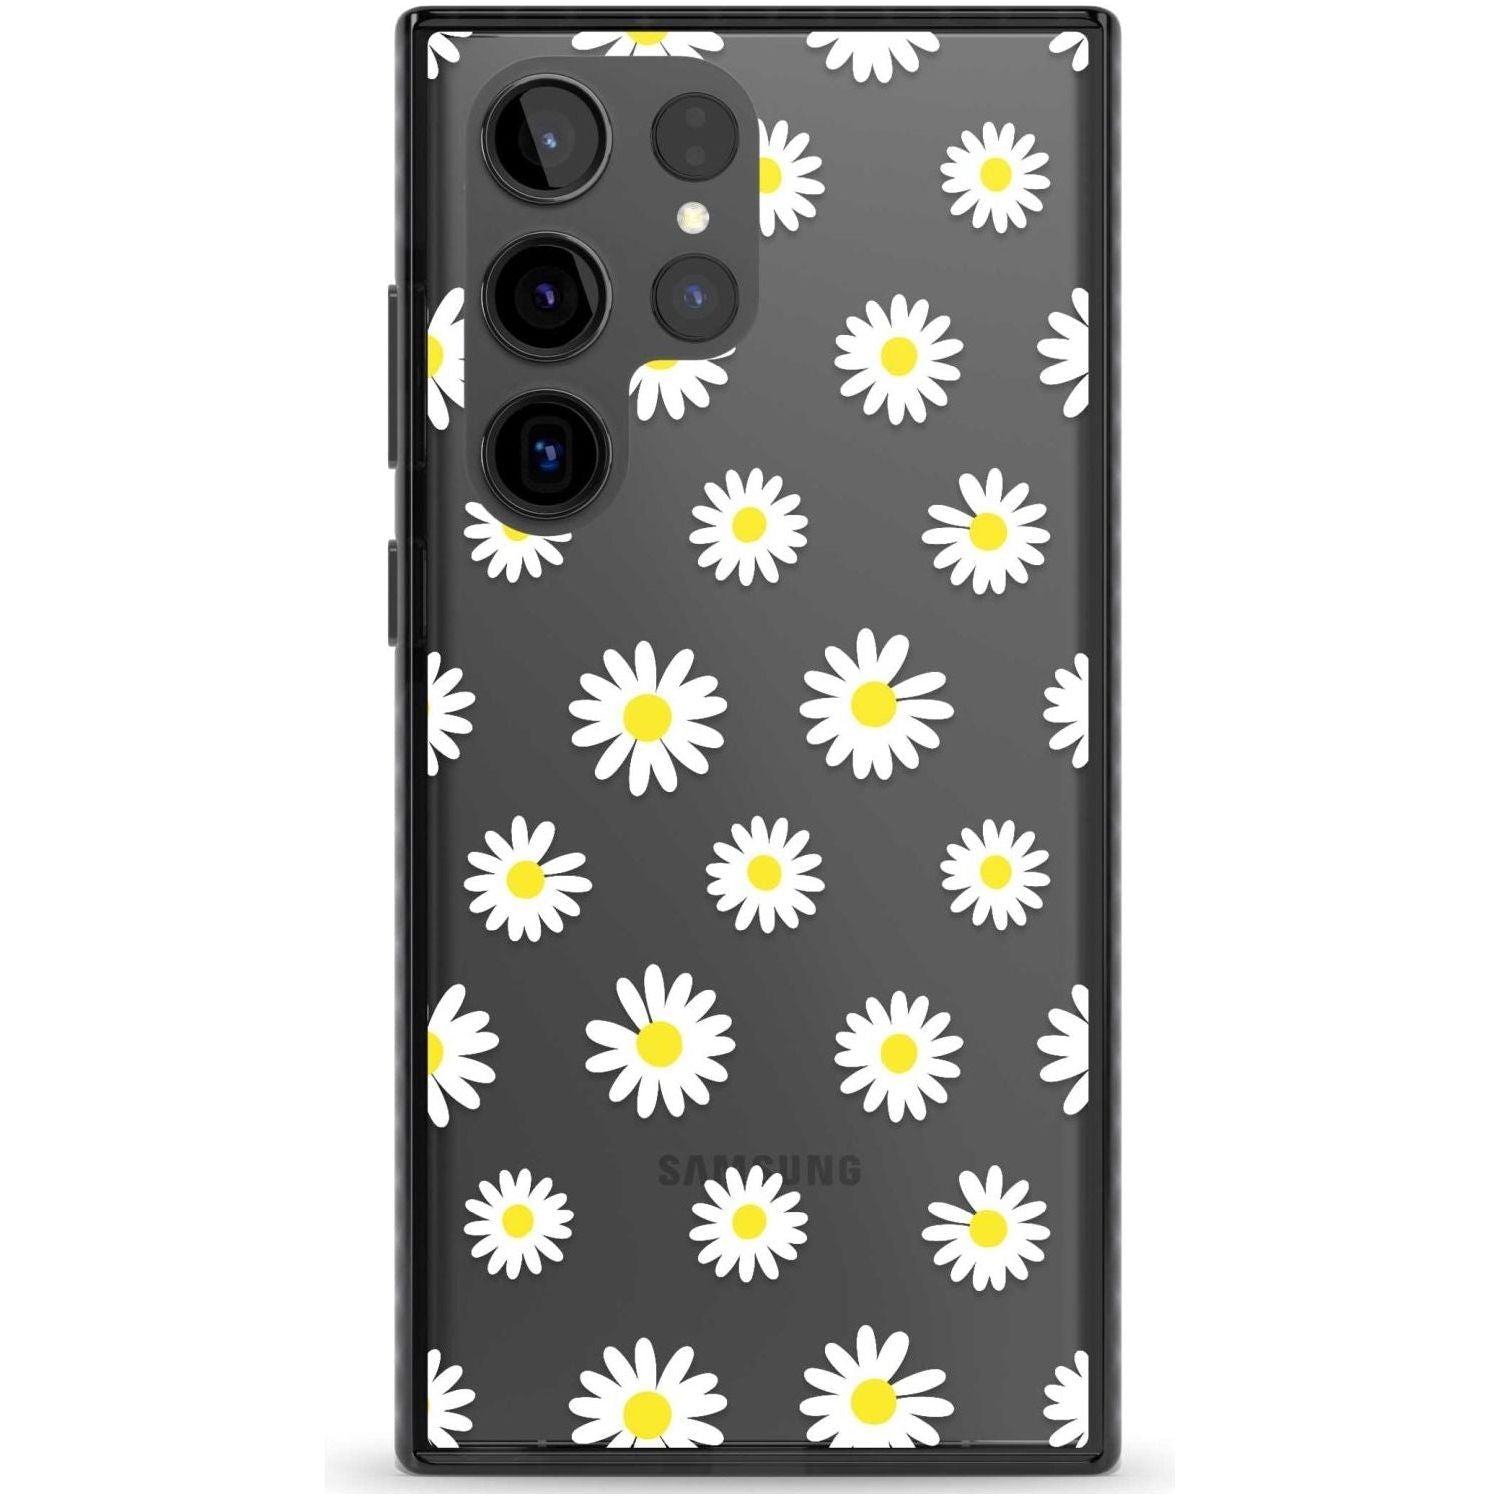 White Daisy Pattern (Clear)